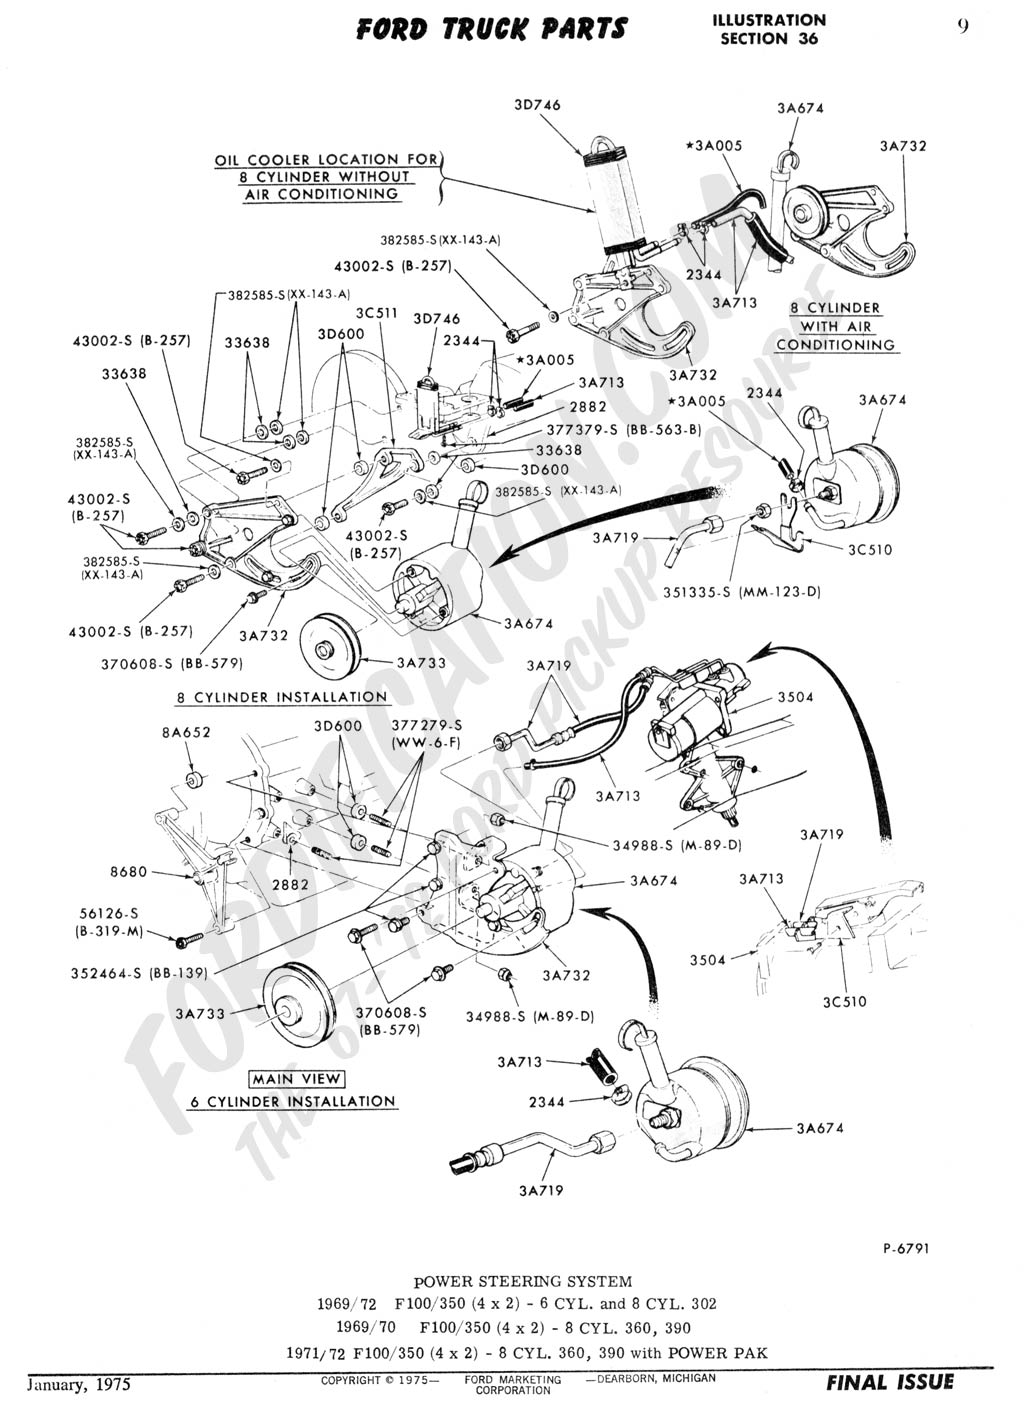 Ford Truck Technical Drawings and Schematics - Section C - Steering